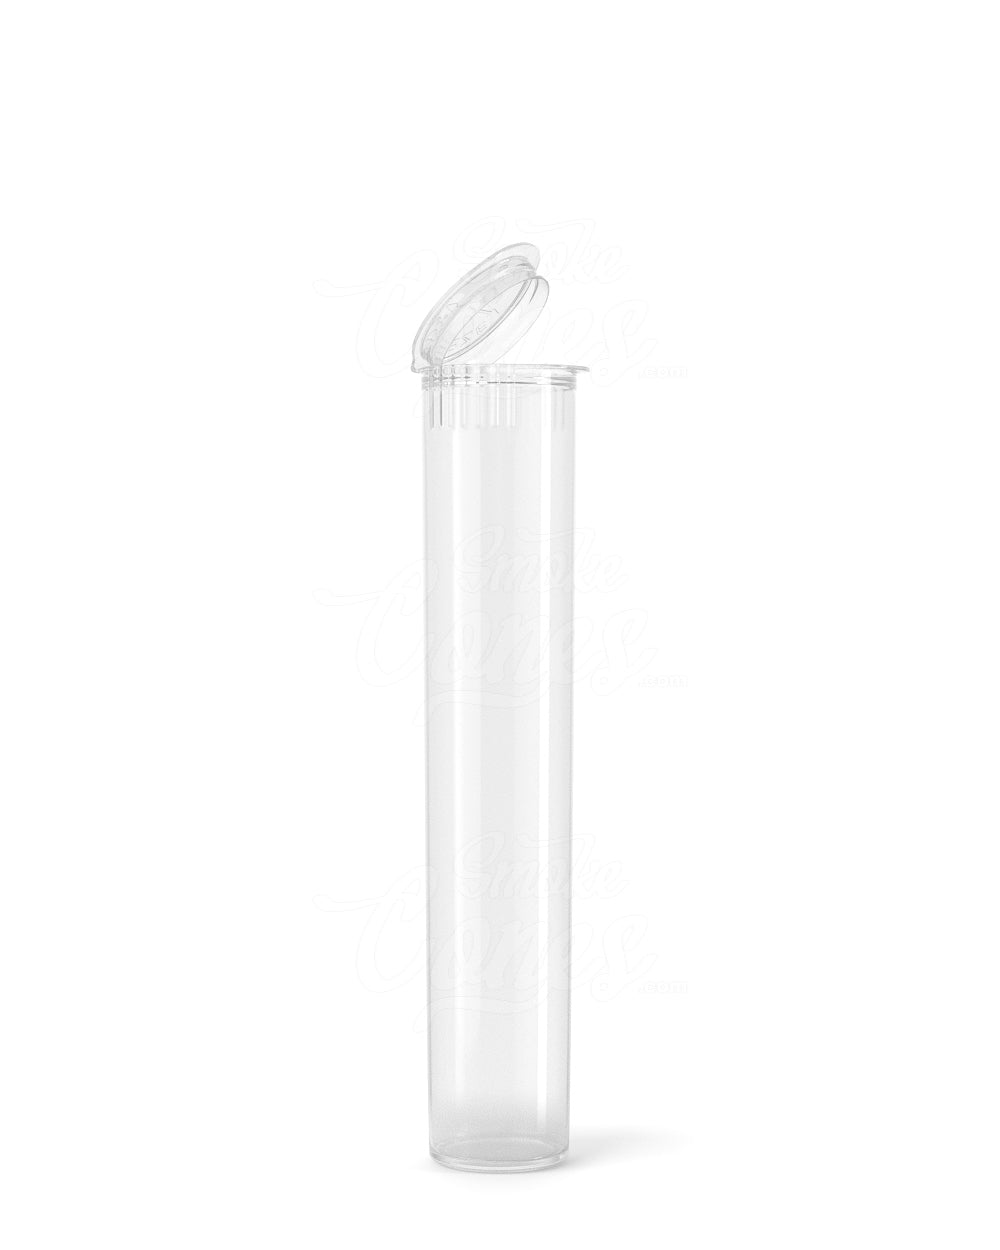 95mm Child Resistant Pop Top Opaque Clear Plastic Pre-Roll Tubes 1000/Box Open - 1